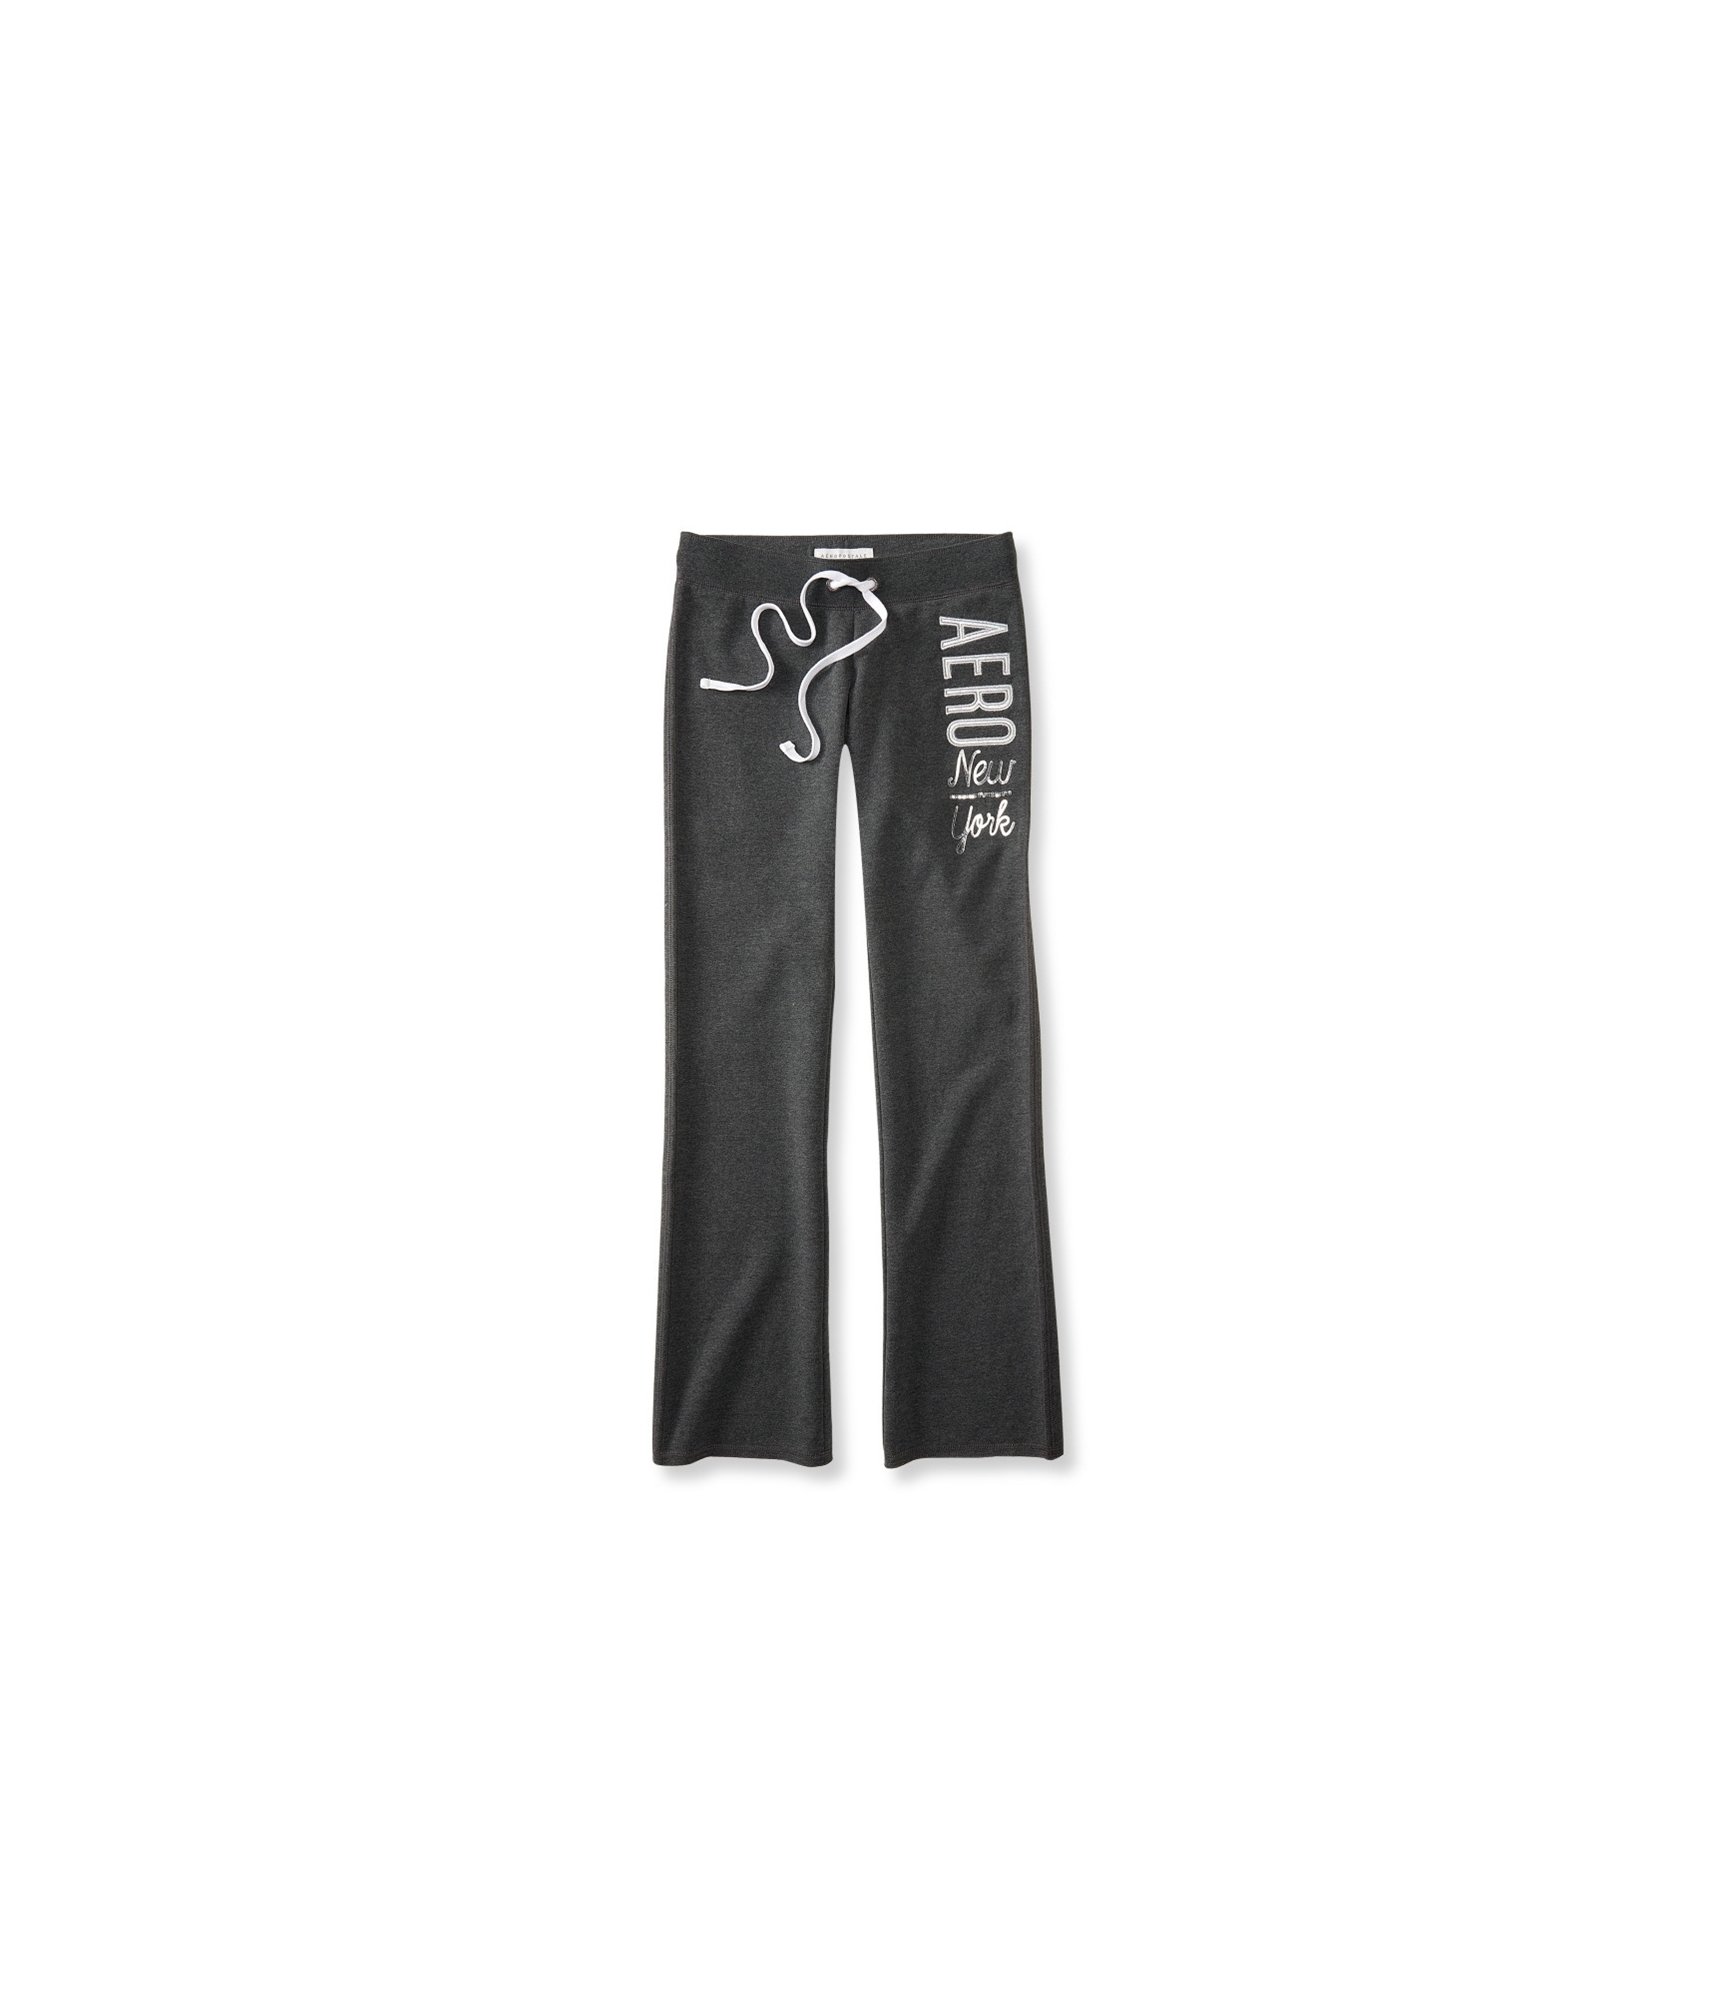 Buy a Aeropostale Womens Fit & Flare Athletic Sweatpants, TW6